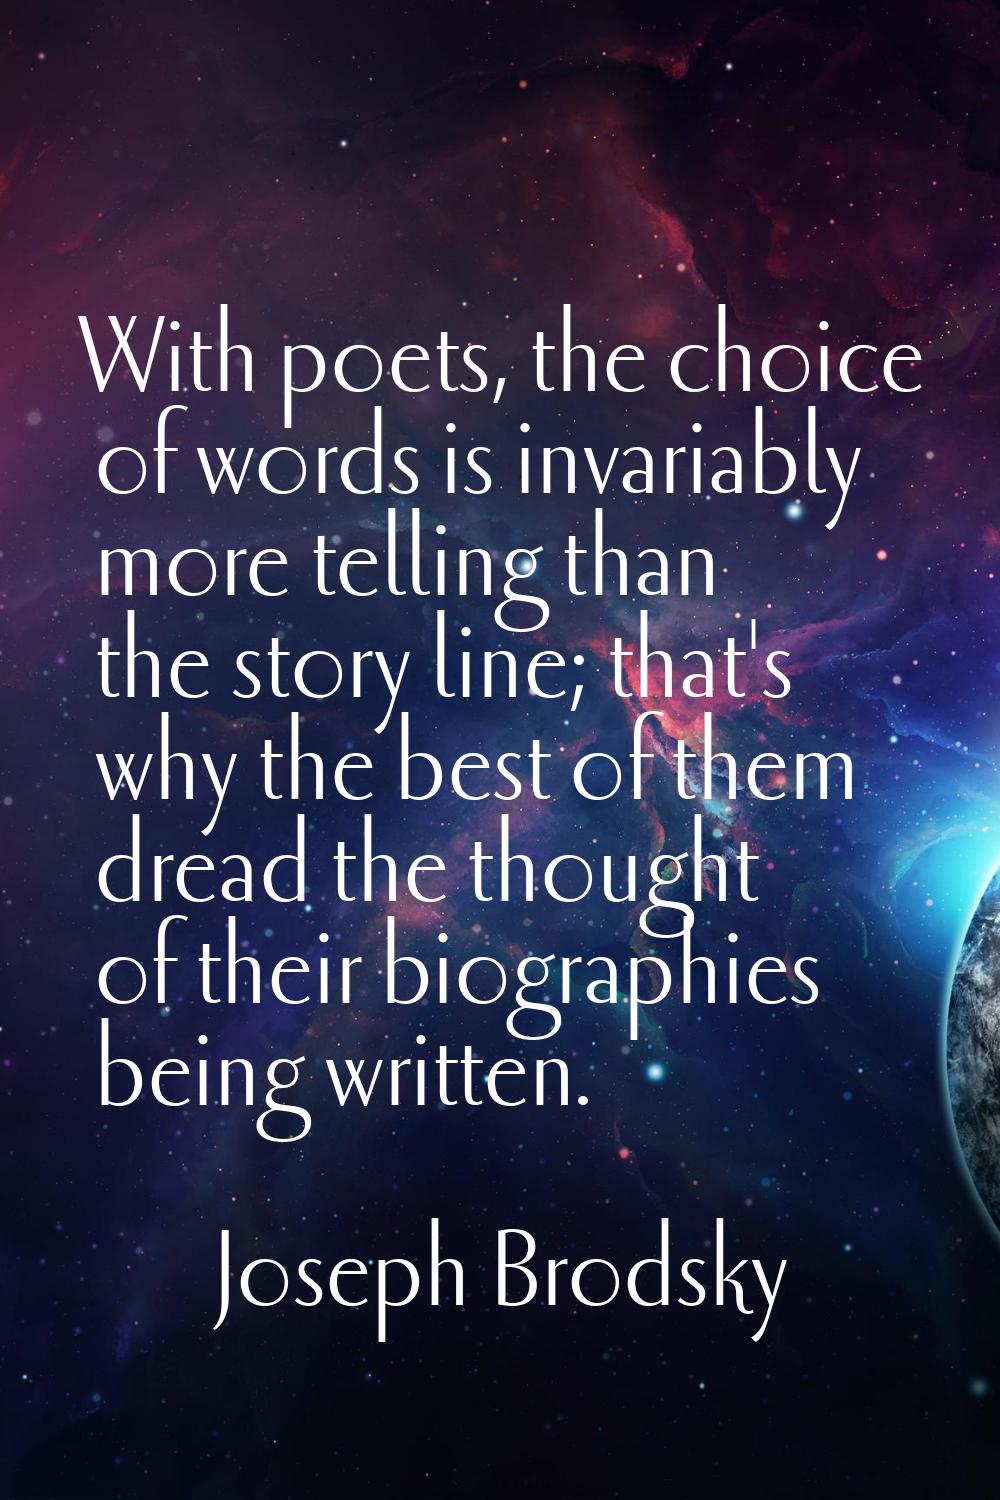 With poets, the choice of words is invariably more telling than the story line; that's why the best